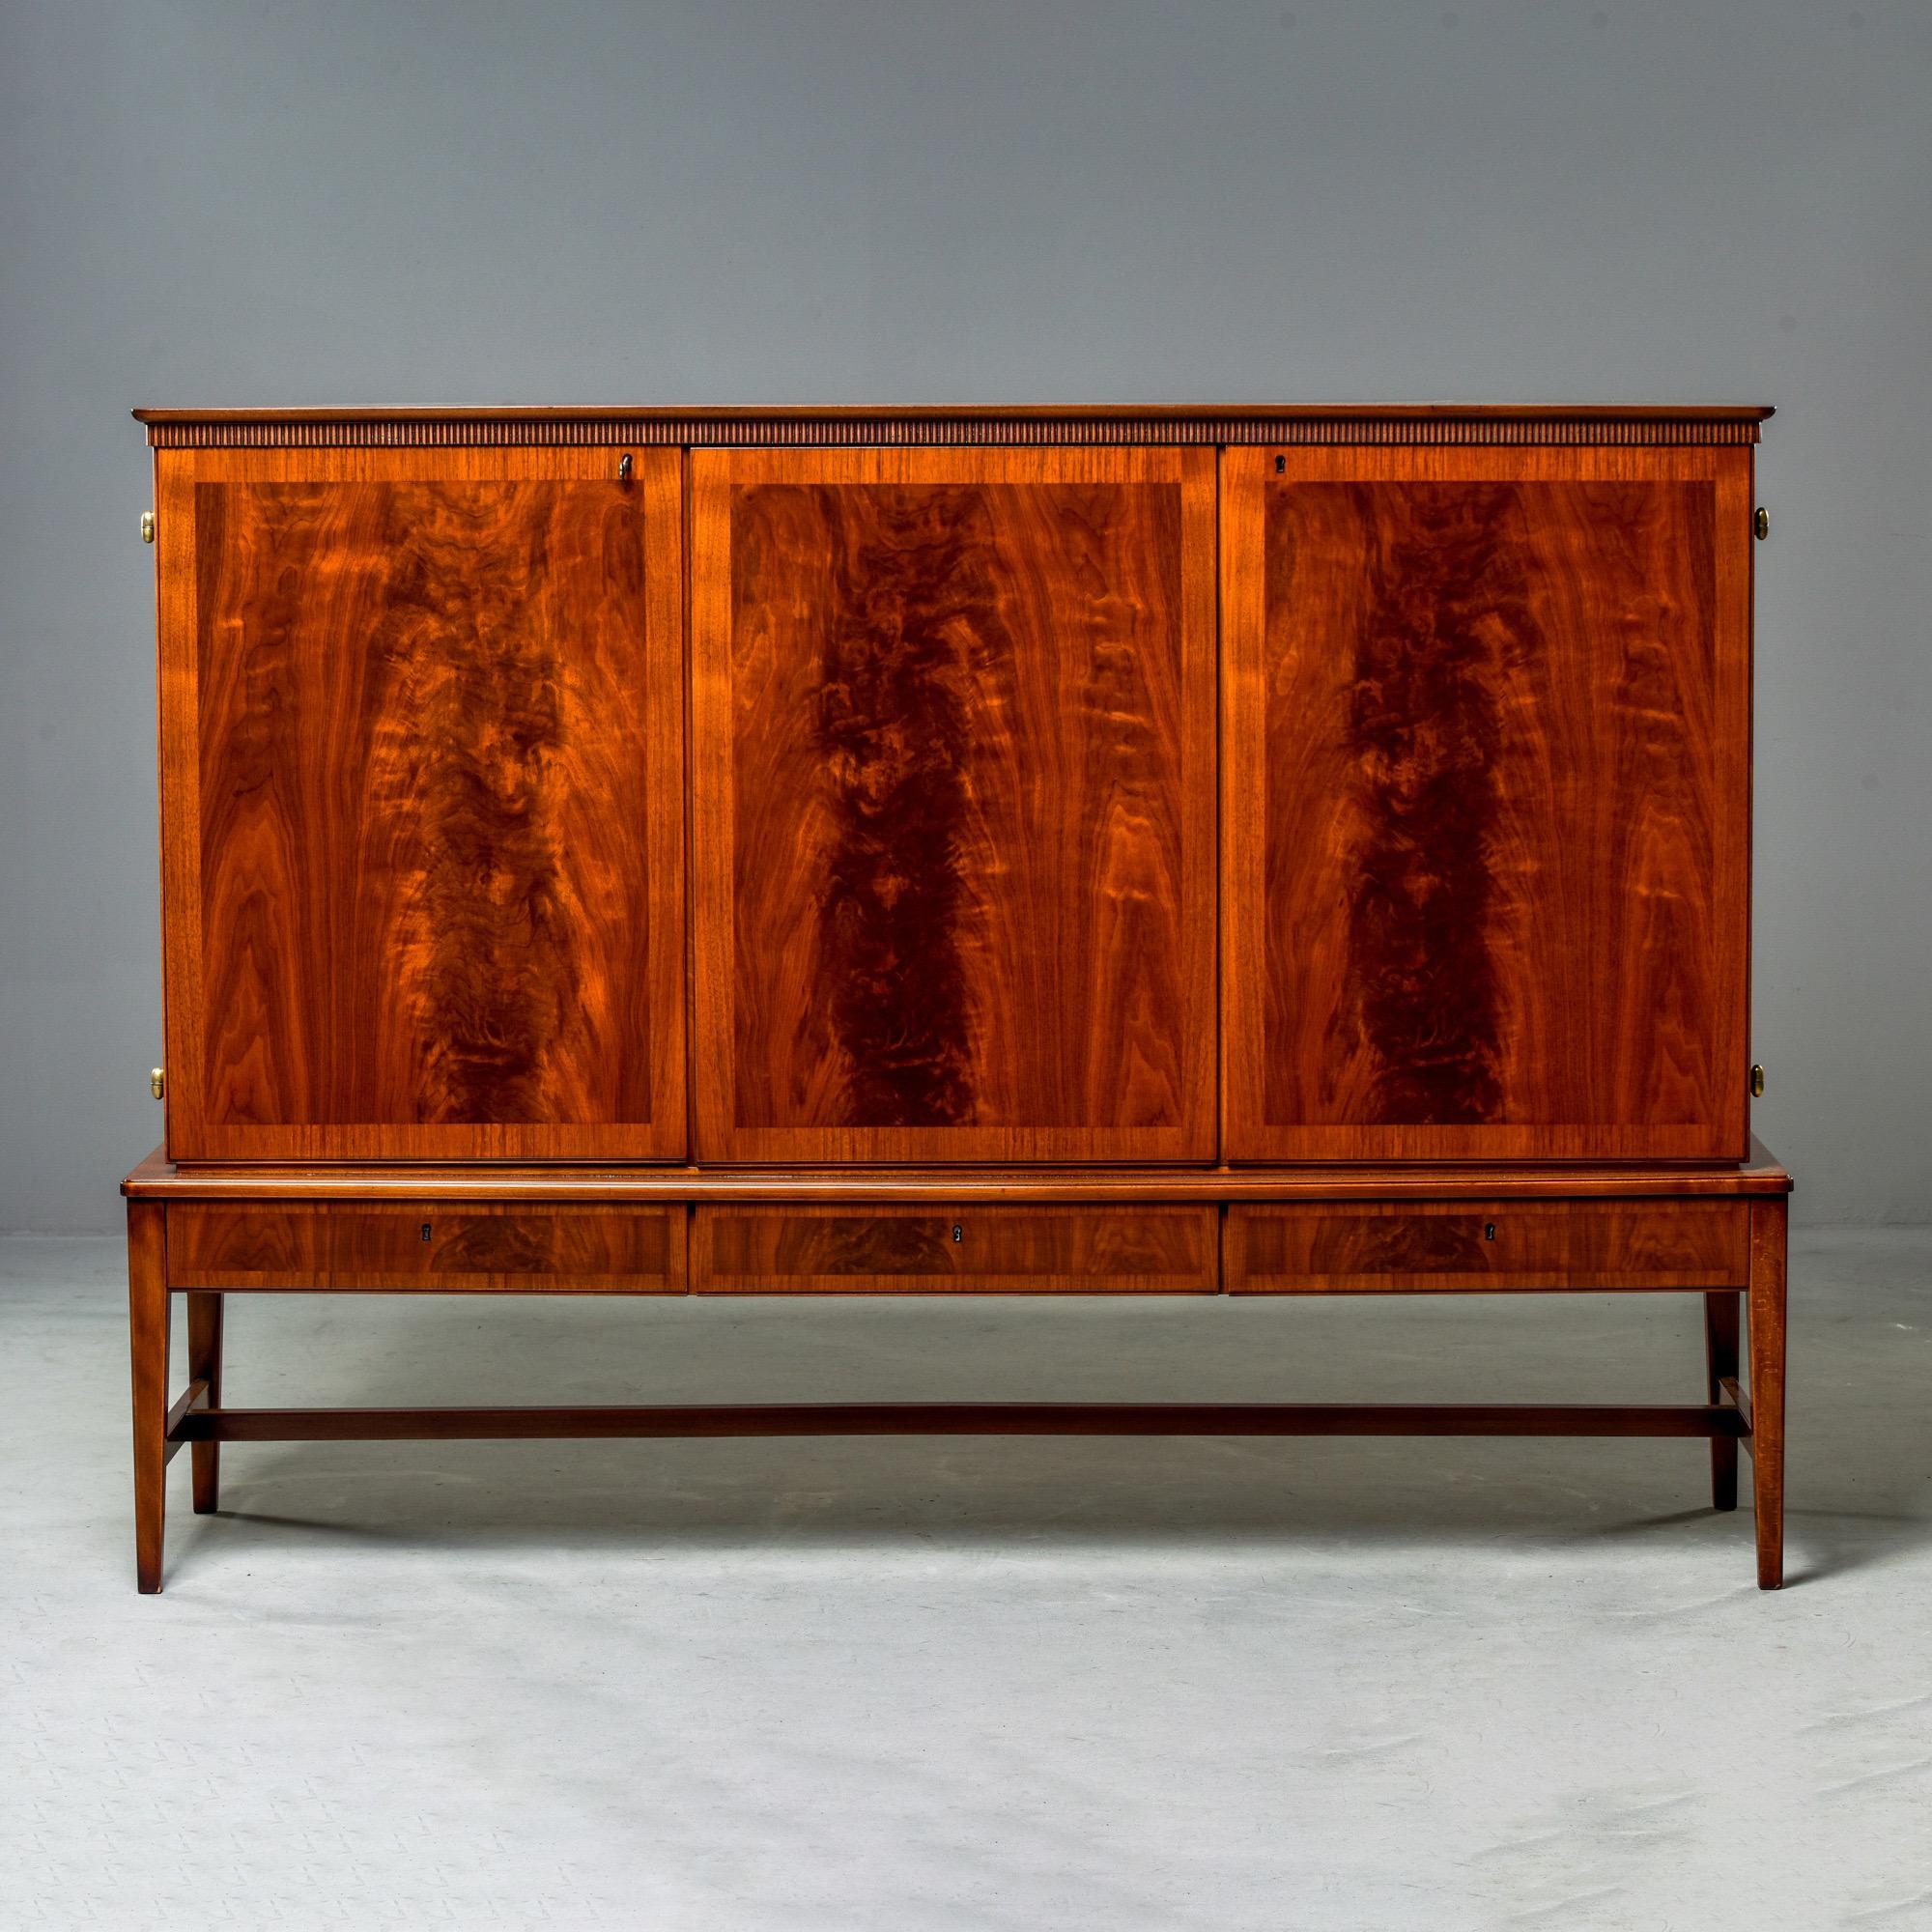 Swedish tall walnut credenza, cabinet-on-stand or buffet, circa 1960s. Top has two locking hinged doors with figured walnut panels and decorative cross-banded edges. Inside is large compartment with two adjustable shelves. The small compartment